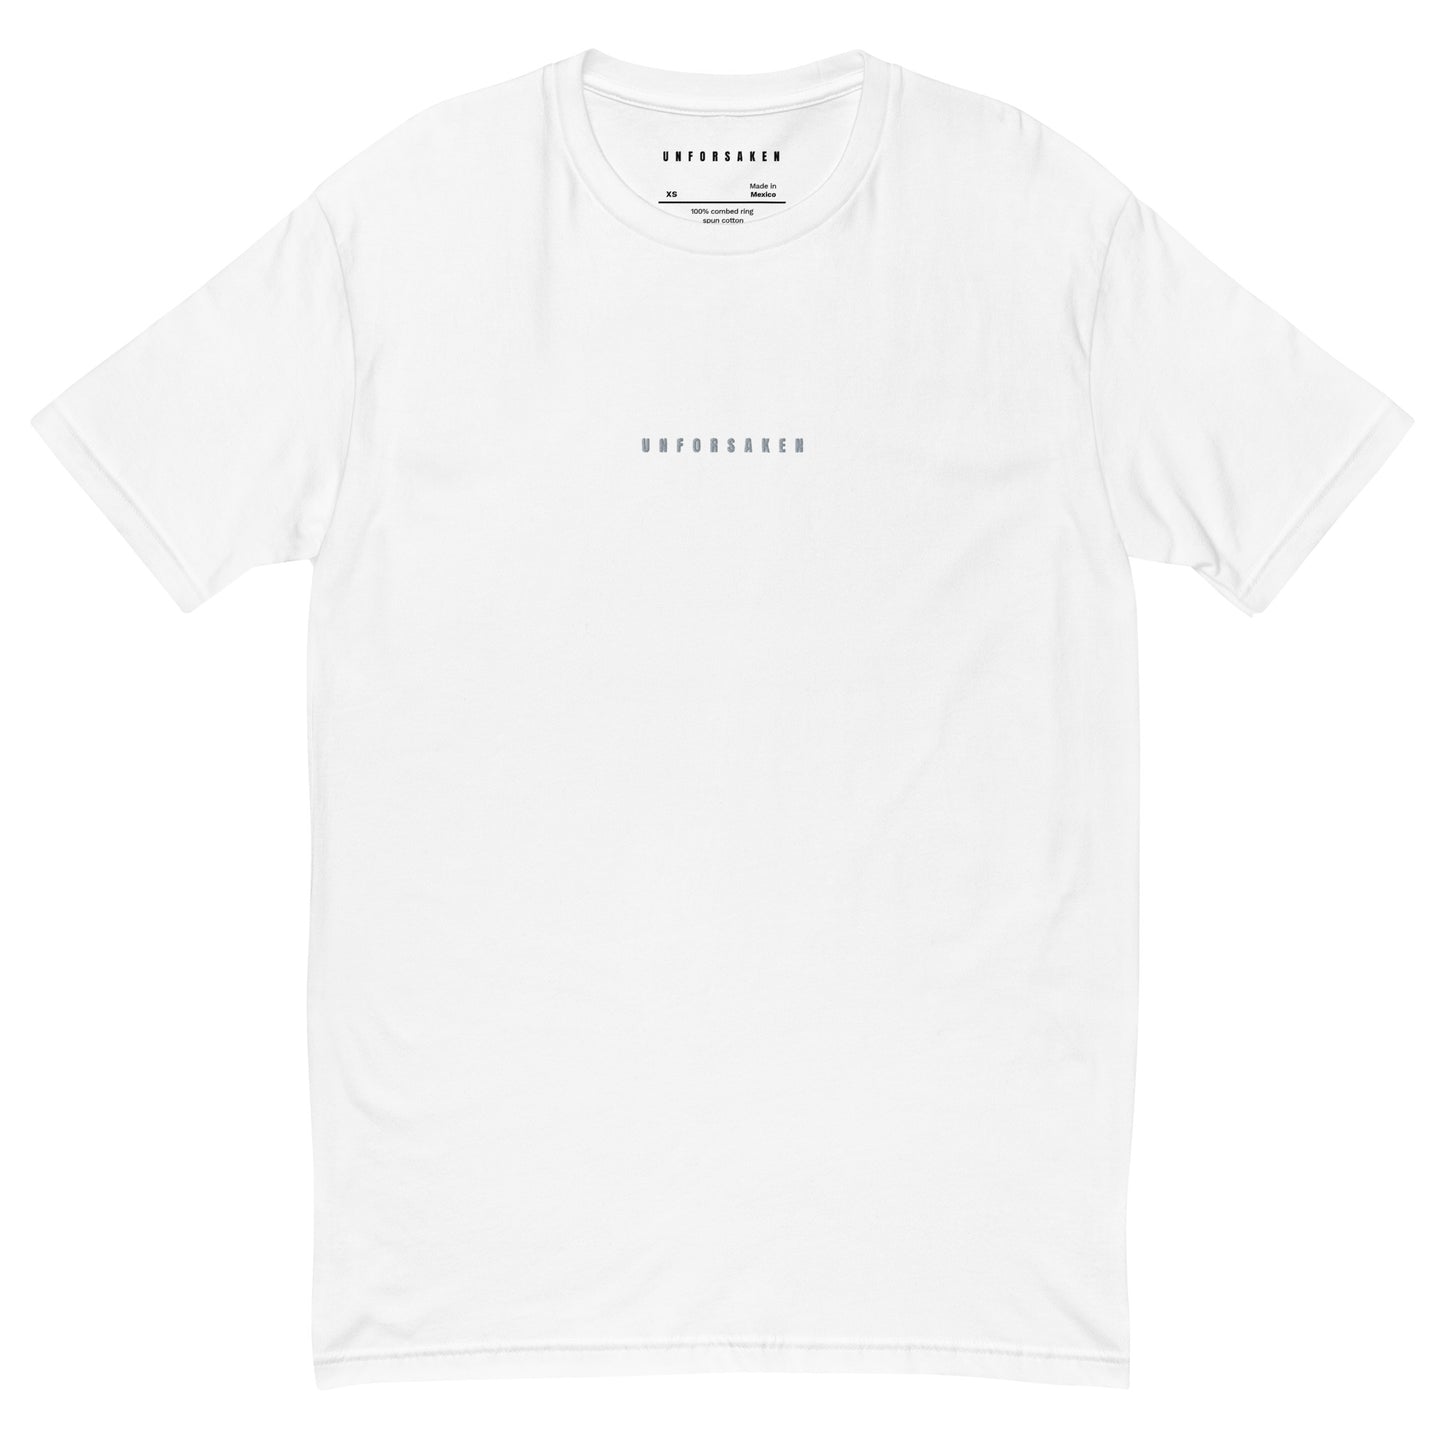 UNFORSAKEN 049 "Never Abandoned" Embroidered Graphic Fitted Tee